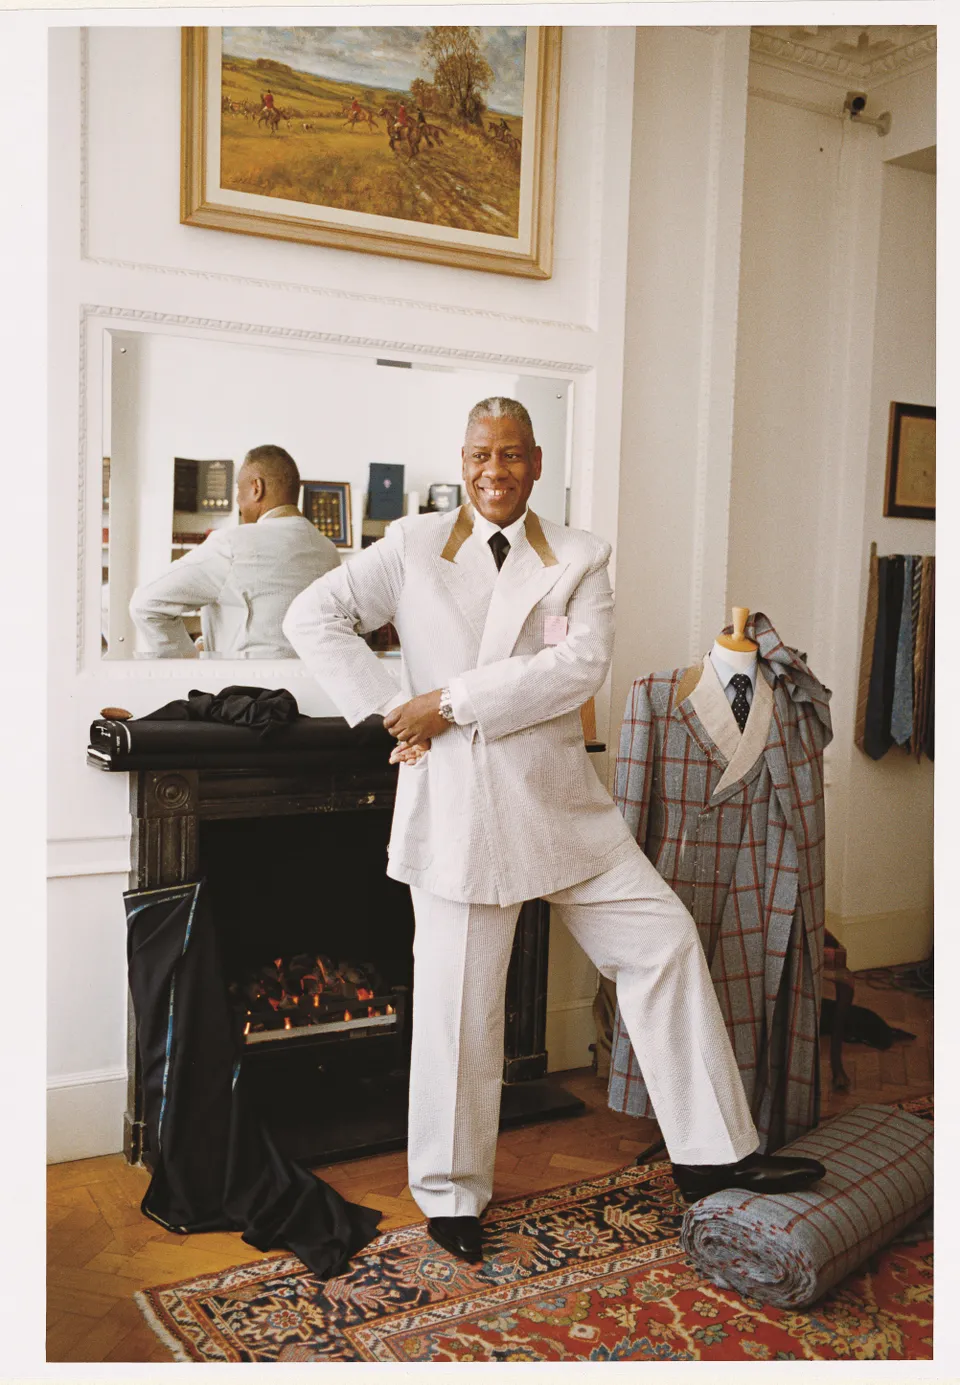 André Leon Talley, American journalist and fashion icon, dies at 73. Image sourced via Vogue.